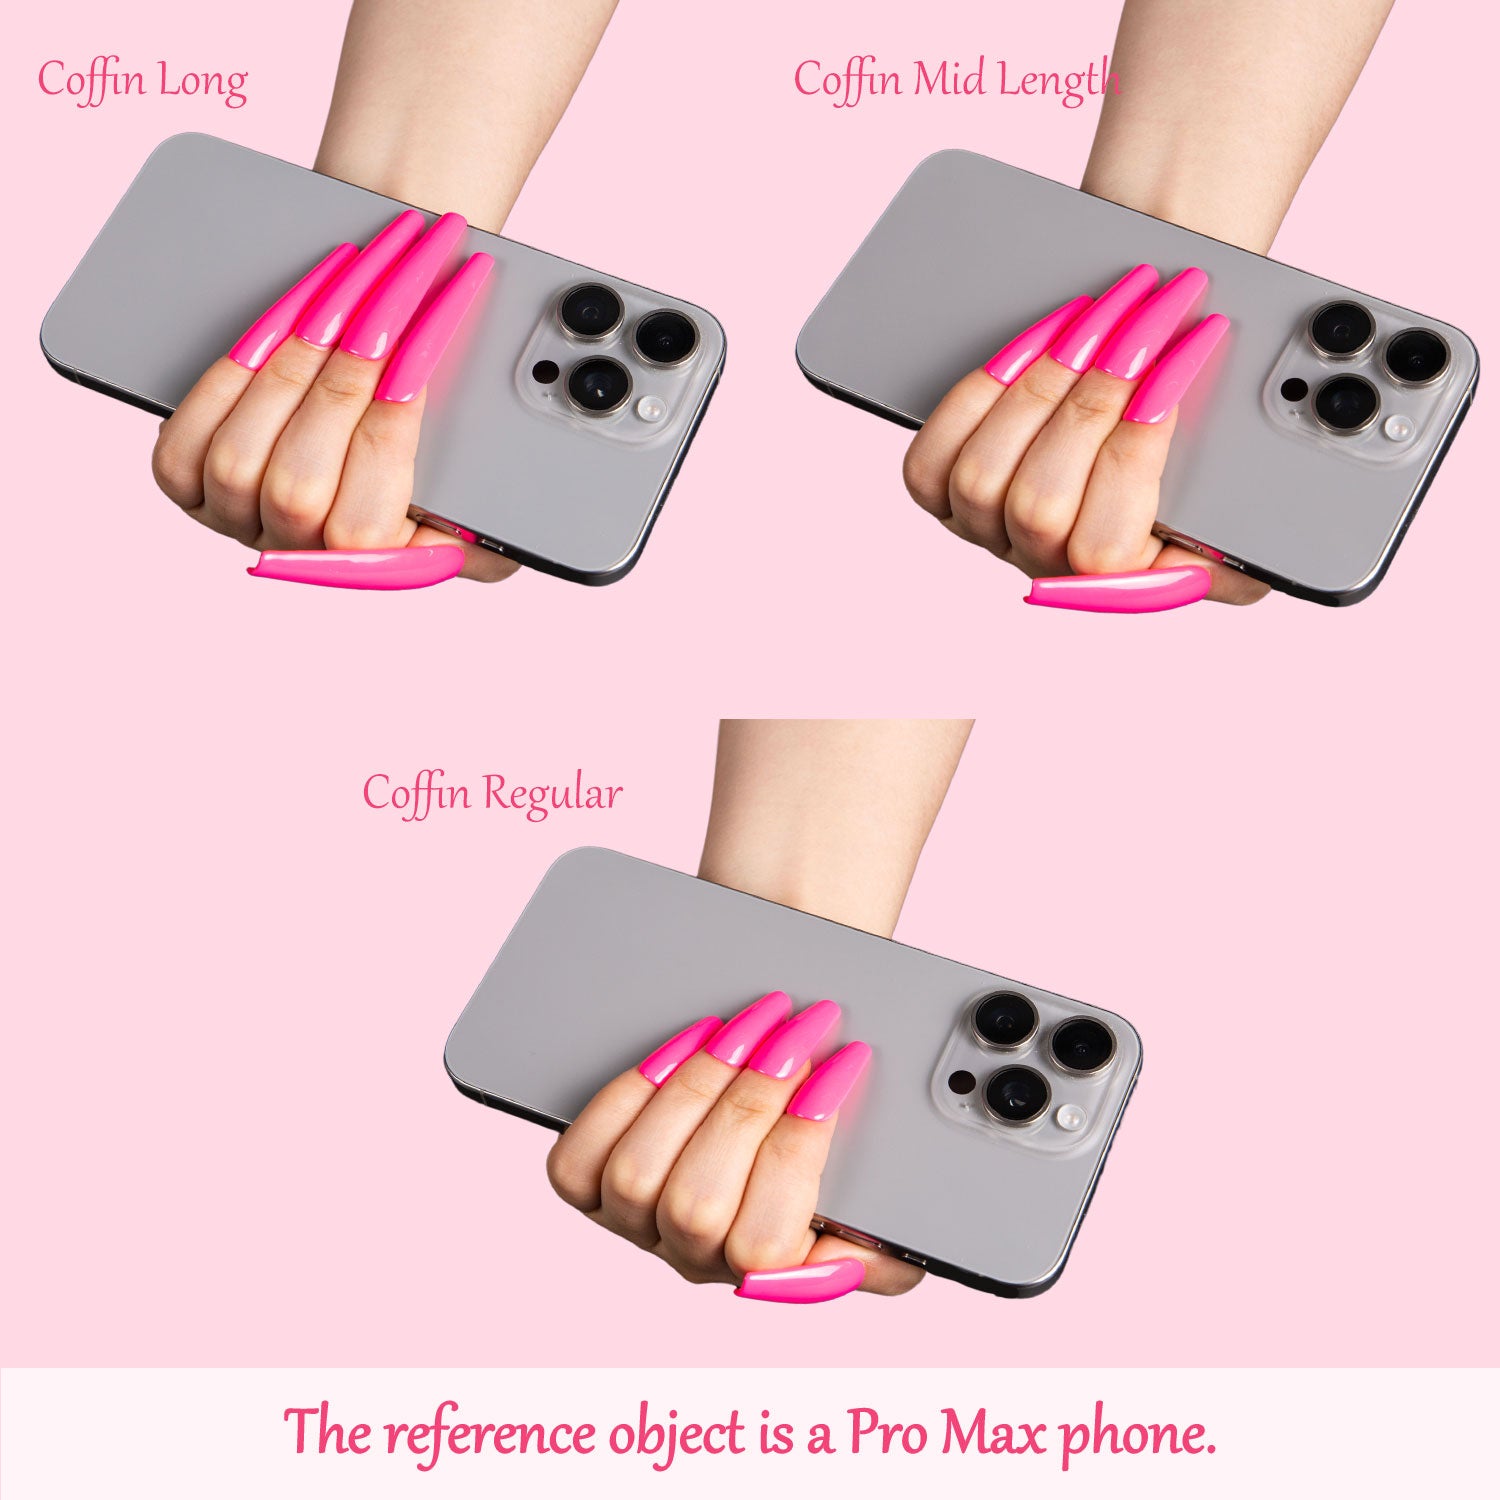 Comparison of three sizes of pink coffin-shaped press-on nails holding a Pro Max phone, labeled as Coffin Long, Coffin Mid Length, and Coffin Regular.